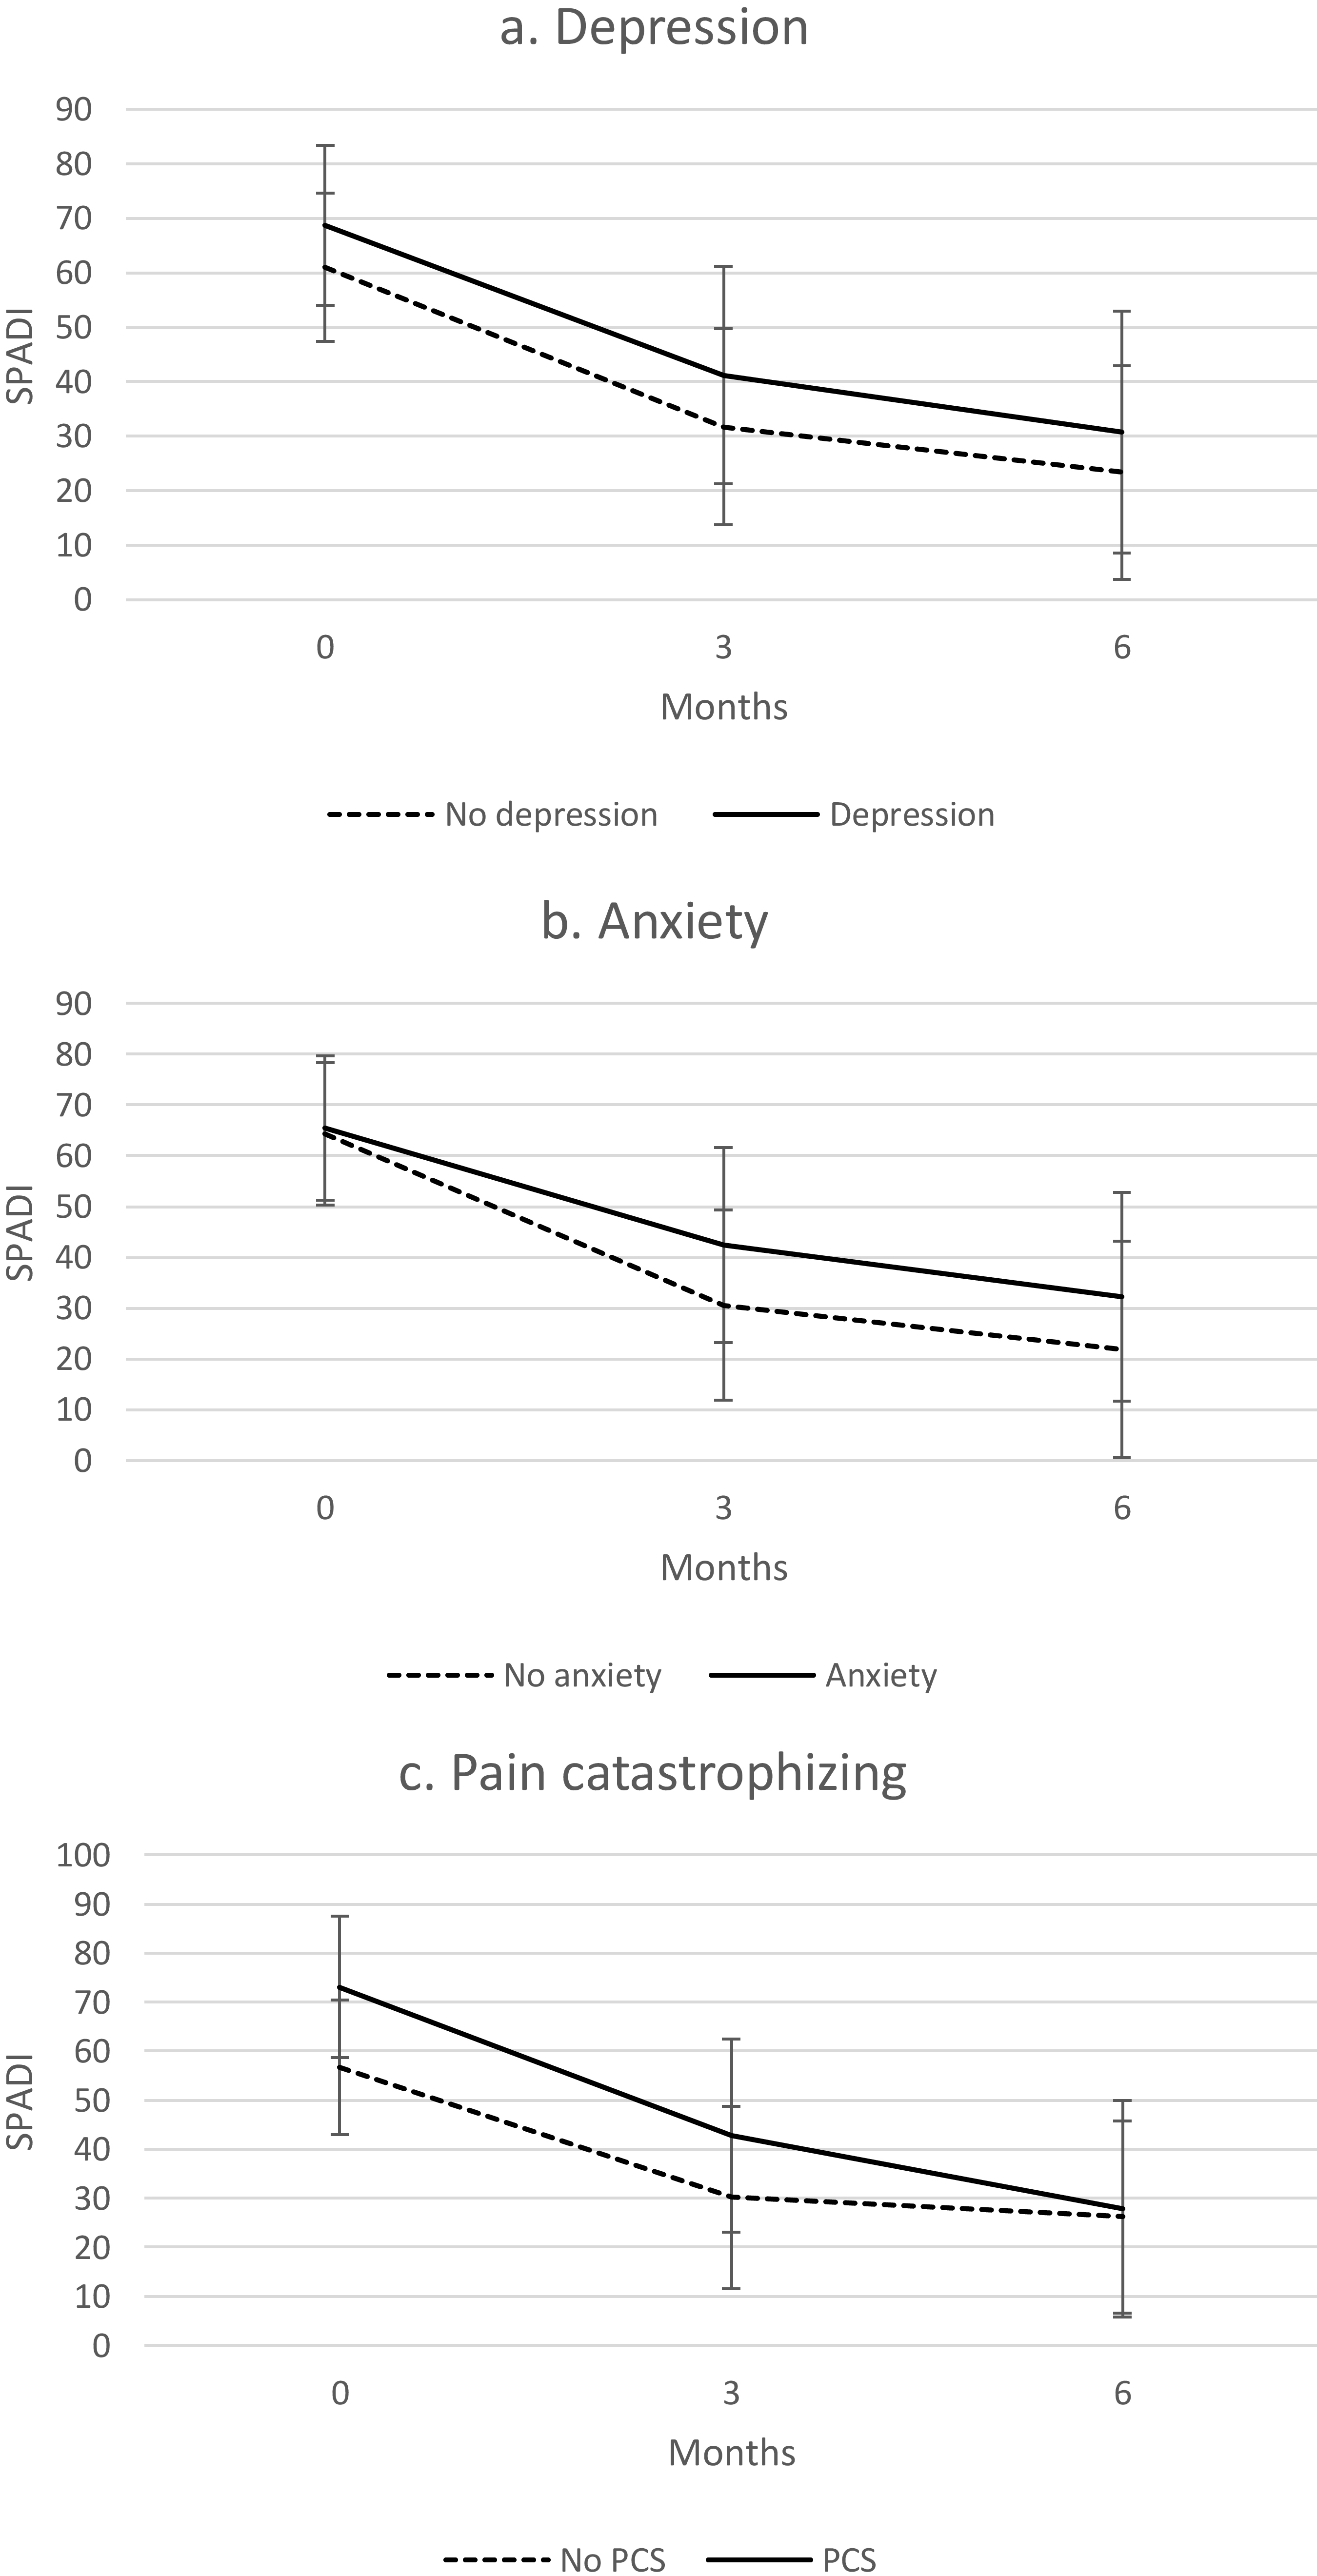 Total SPADI score estimated marginal means with 95% confidence intervals for a) Depression, b) Anxiety and c) Pain catastrophizing.